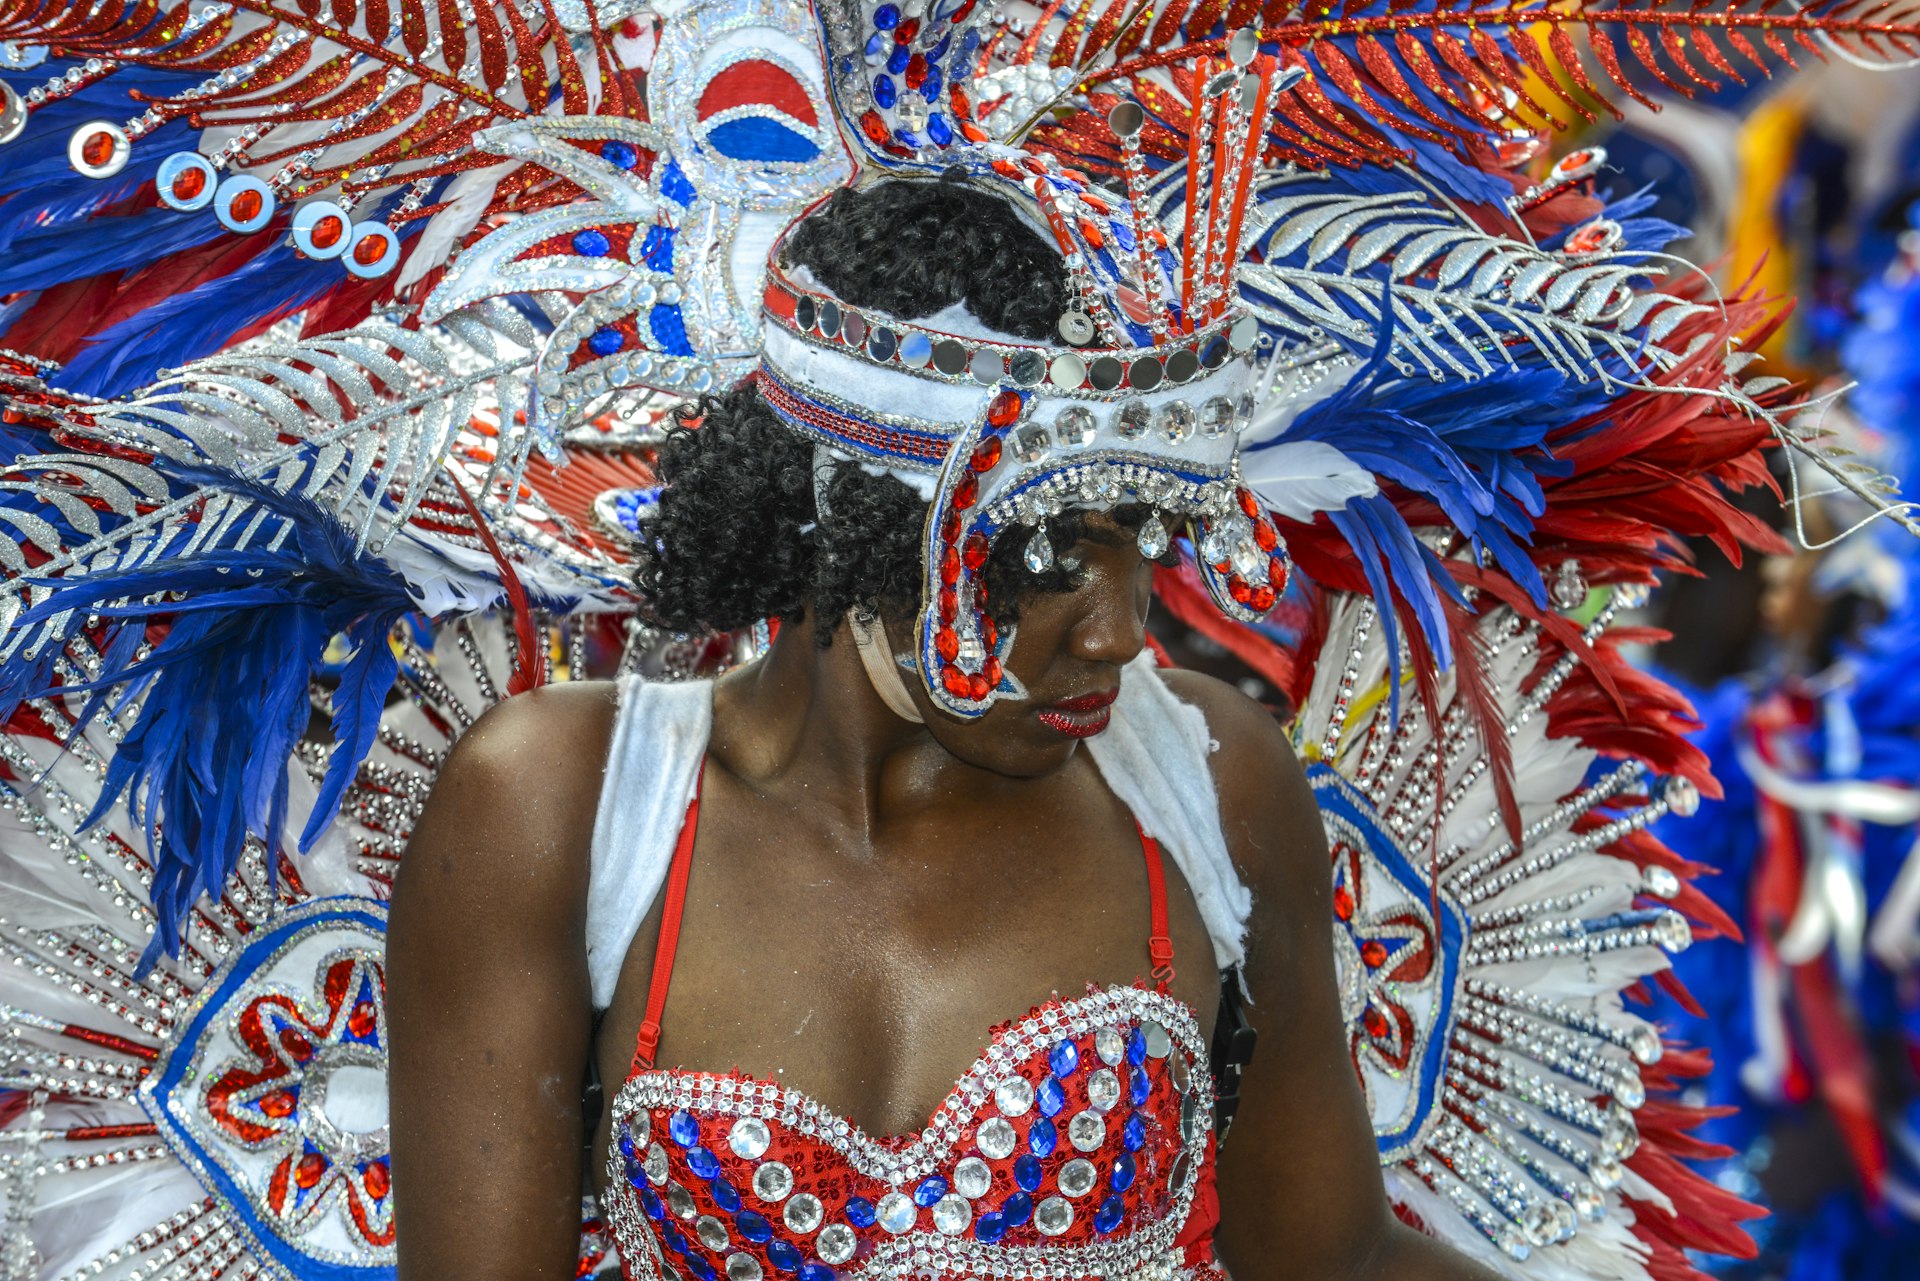 A dancer in traditional colorful red and silver costume at Junkanoo Festival in Nassau, The Bahamas 